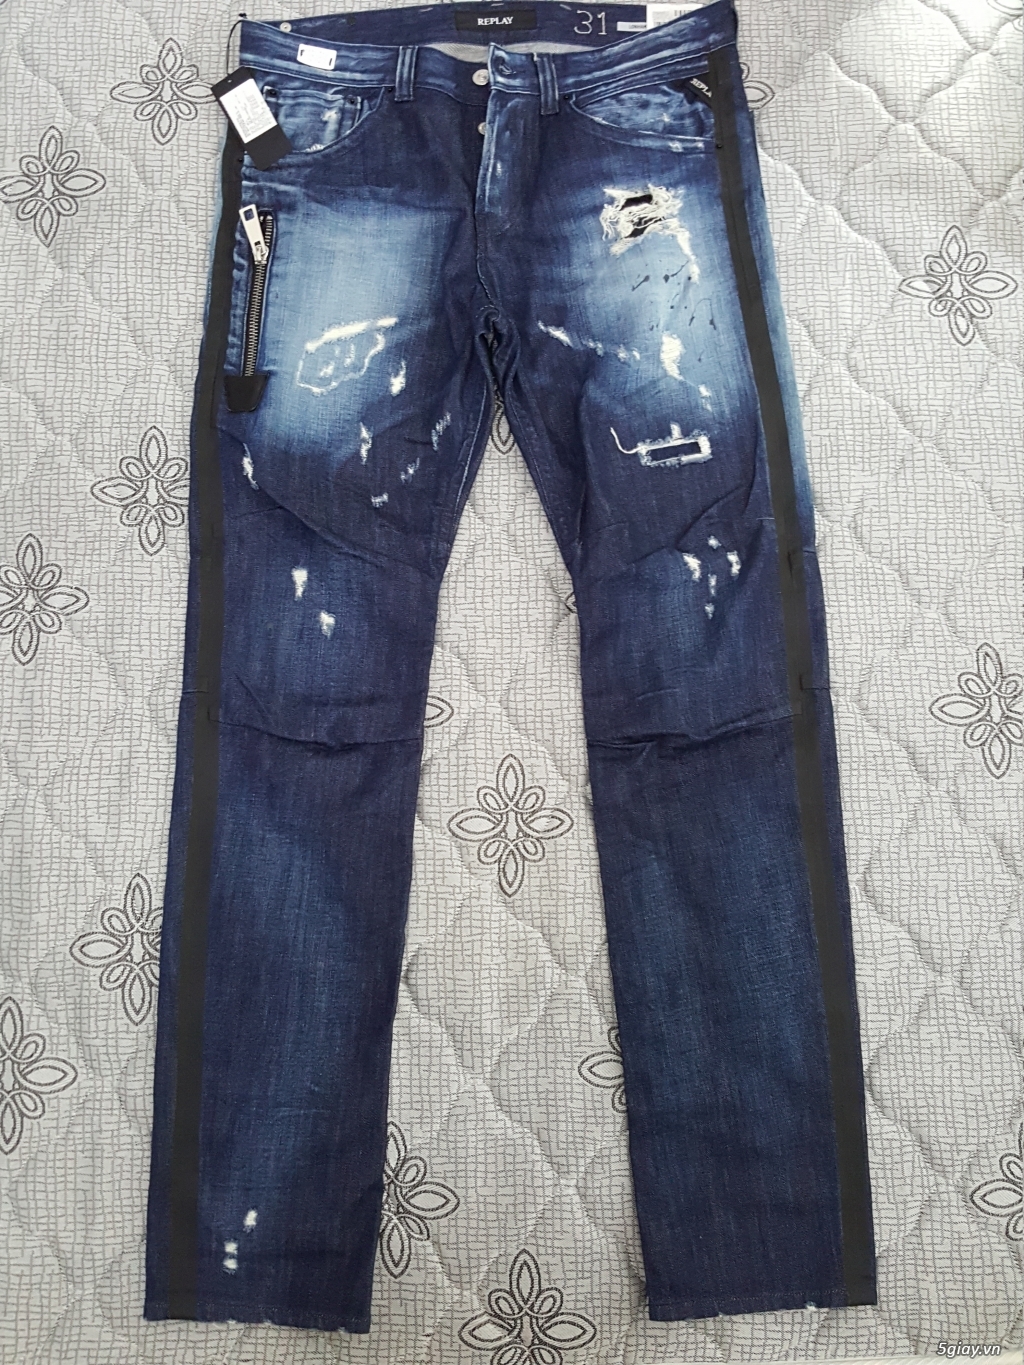 Jeans REPLAY Lonham size 31 - New full tags ! - 1